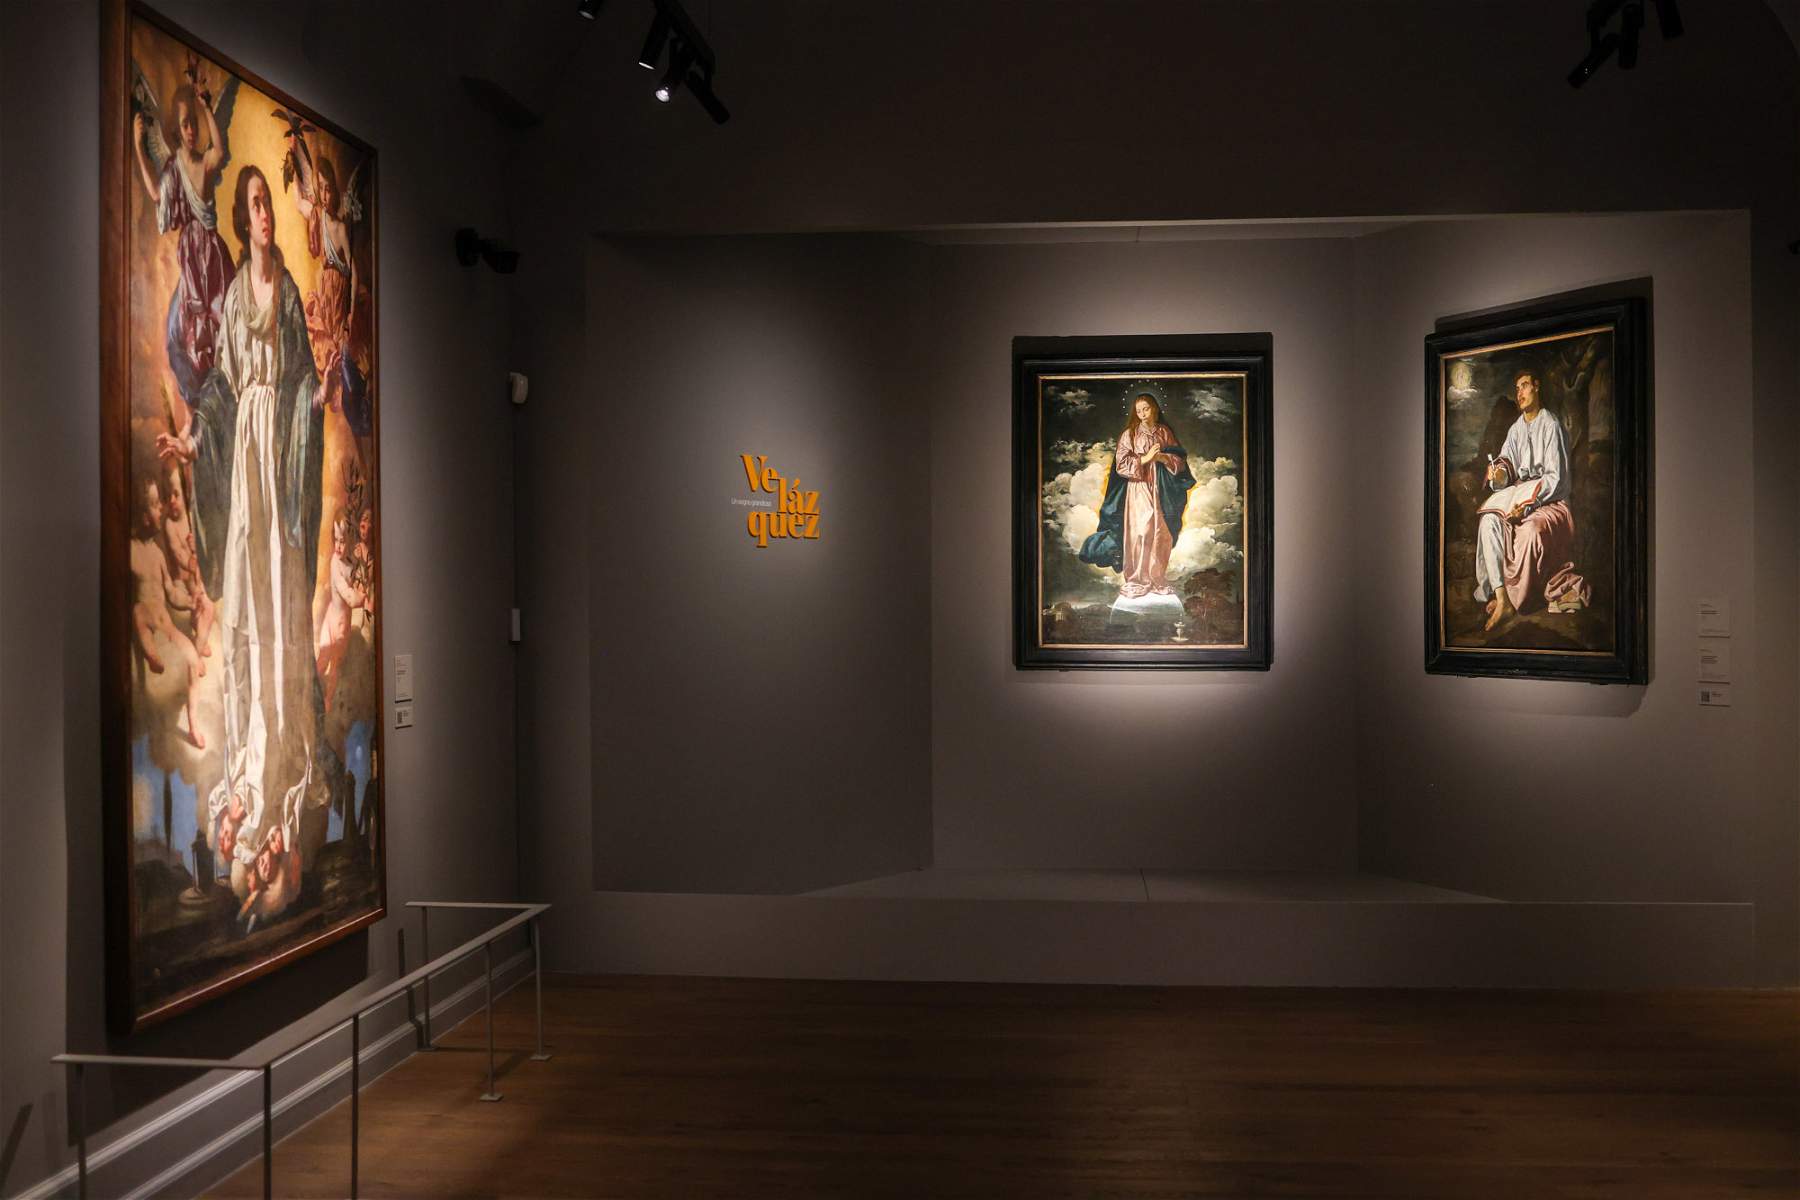 At the Gallerie d'Italia in Naples, two Velázquez masterpieces from London's National Gallery